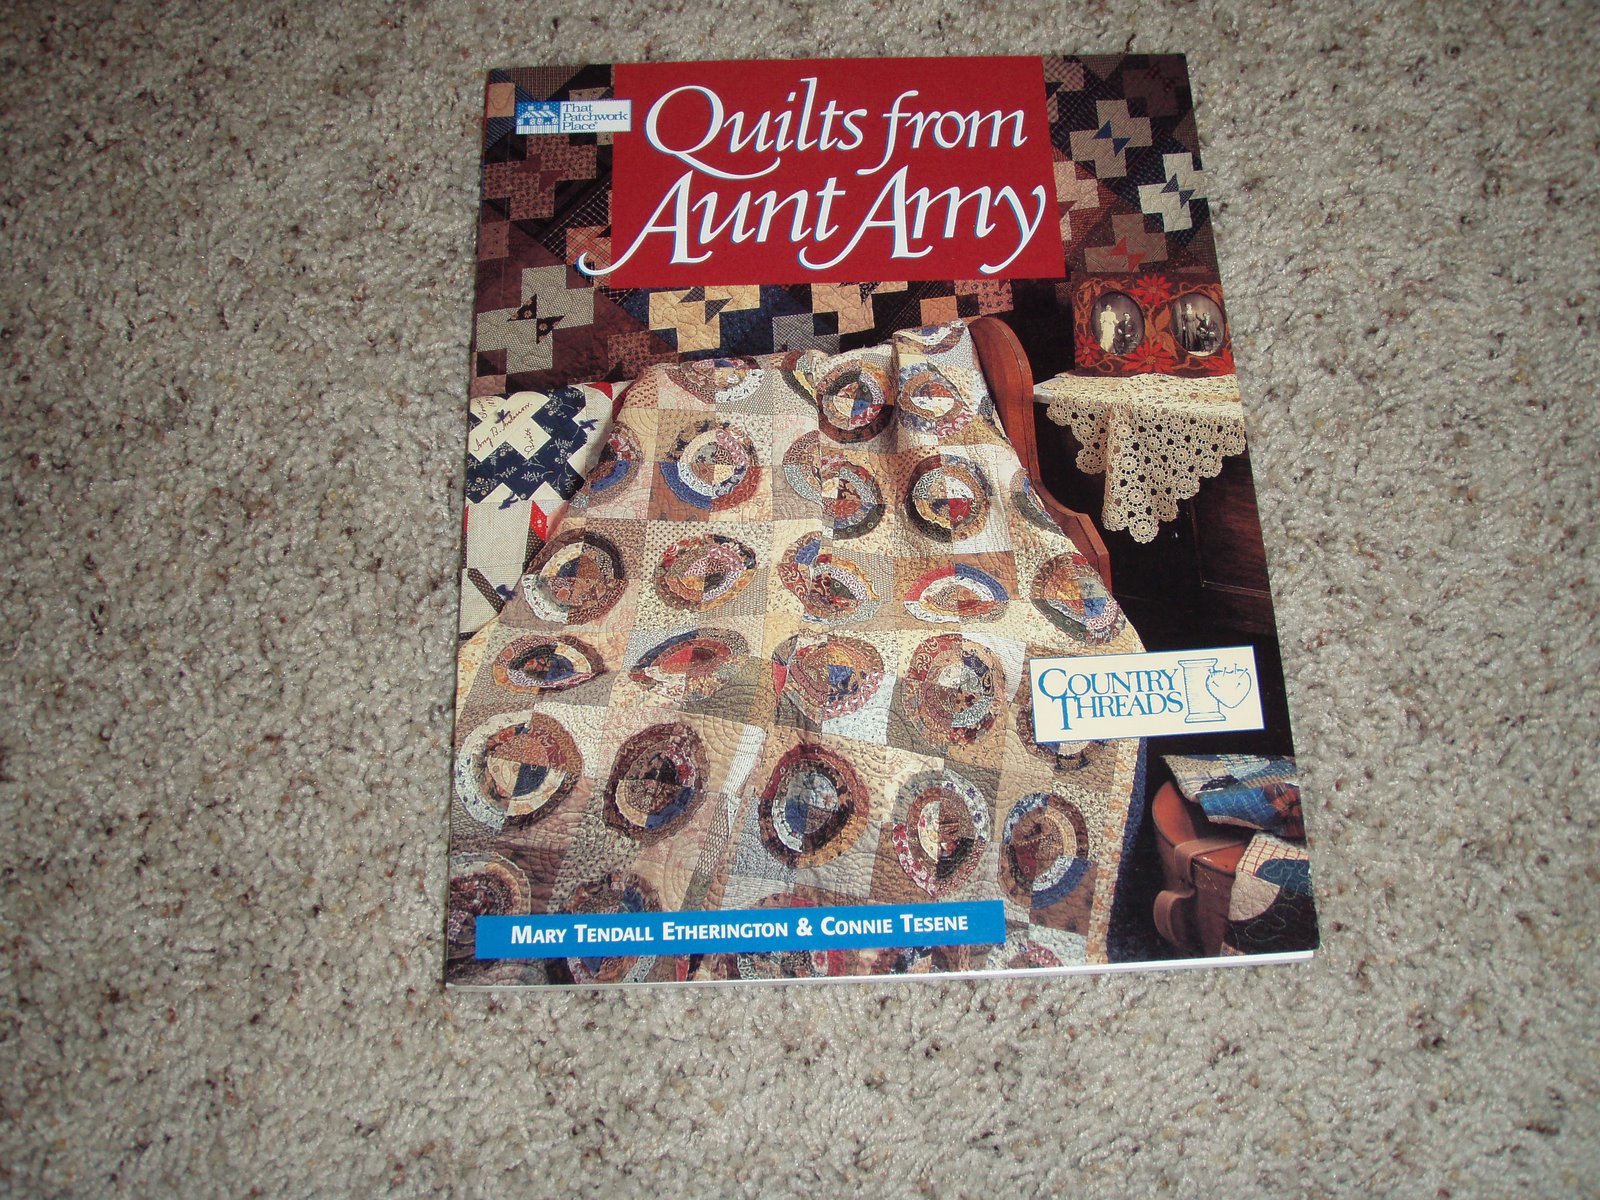 [quilts+from+aunt+amy+1.JPG]